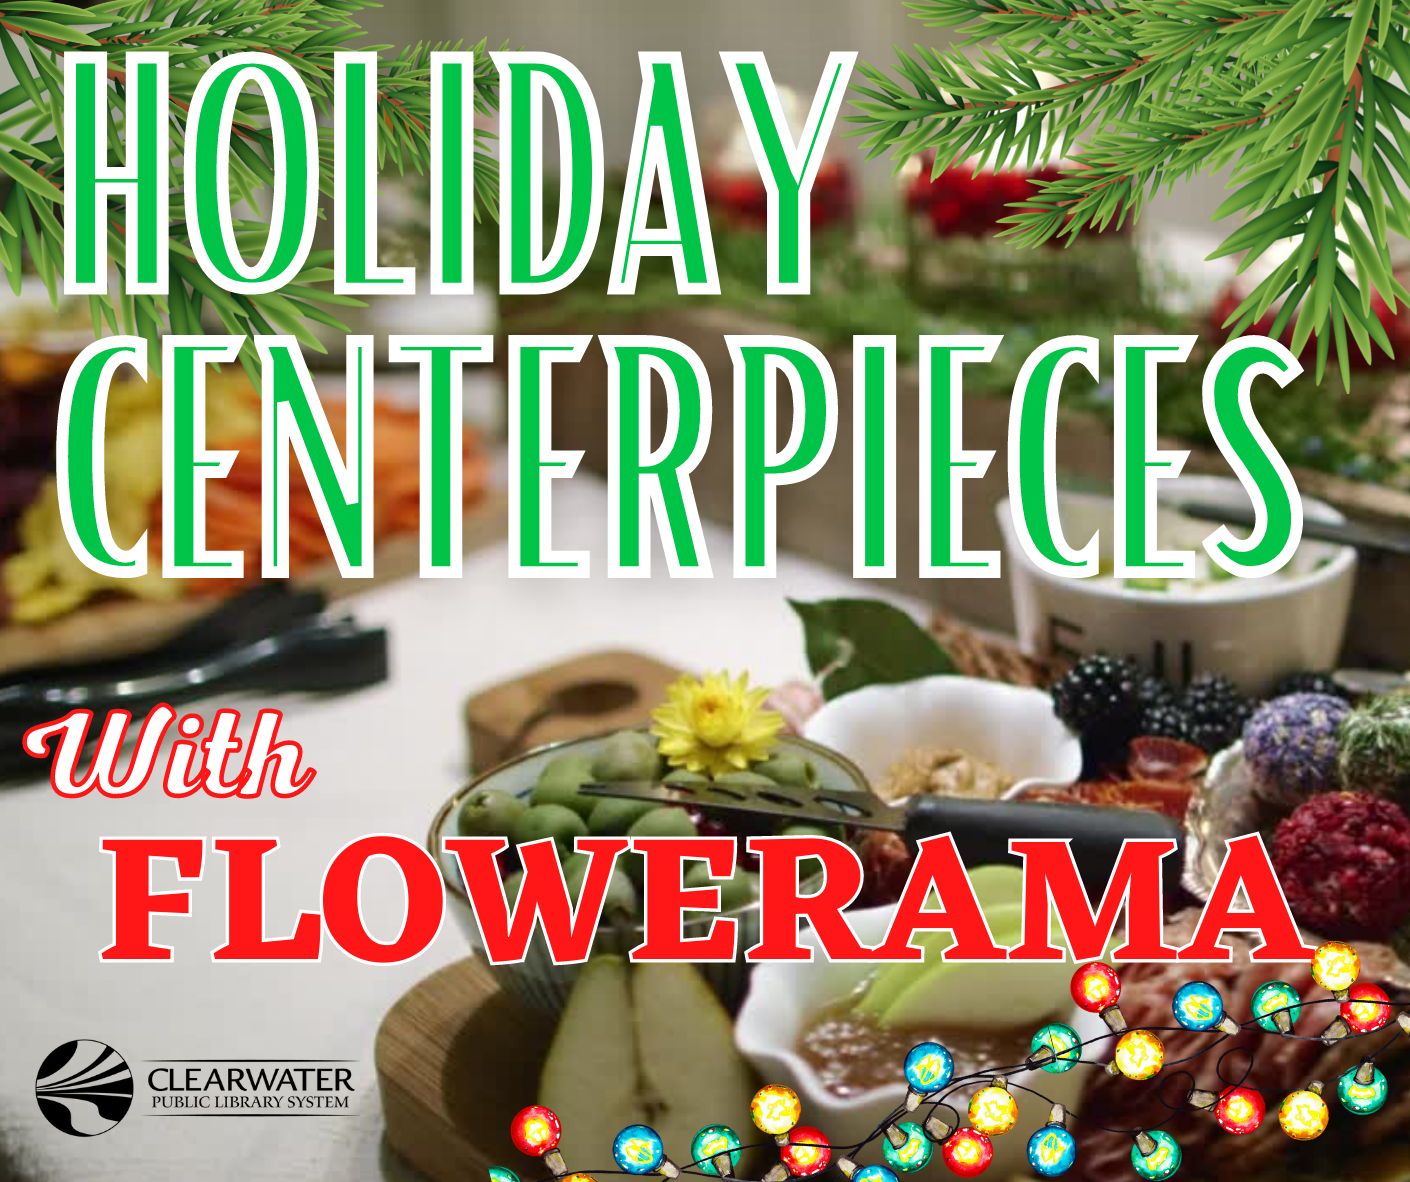 Holiday Centerpieces With Flowerama